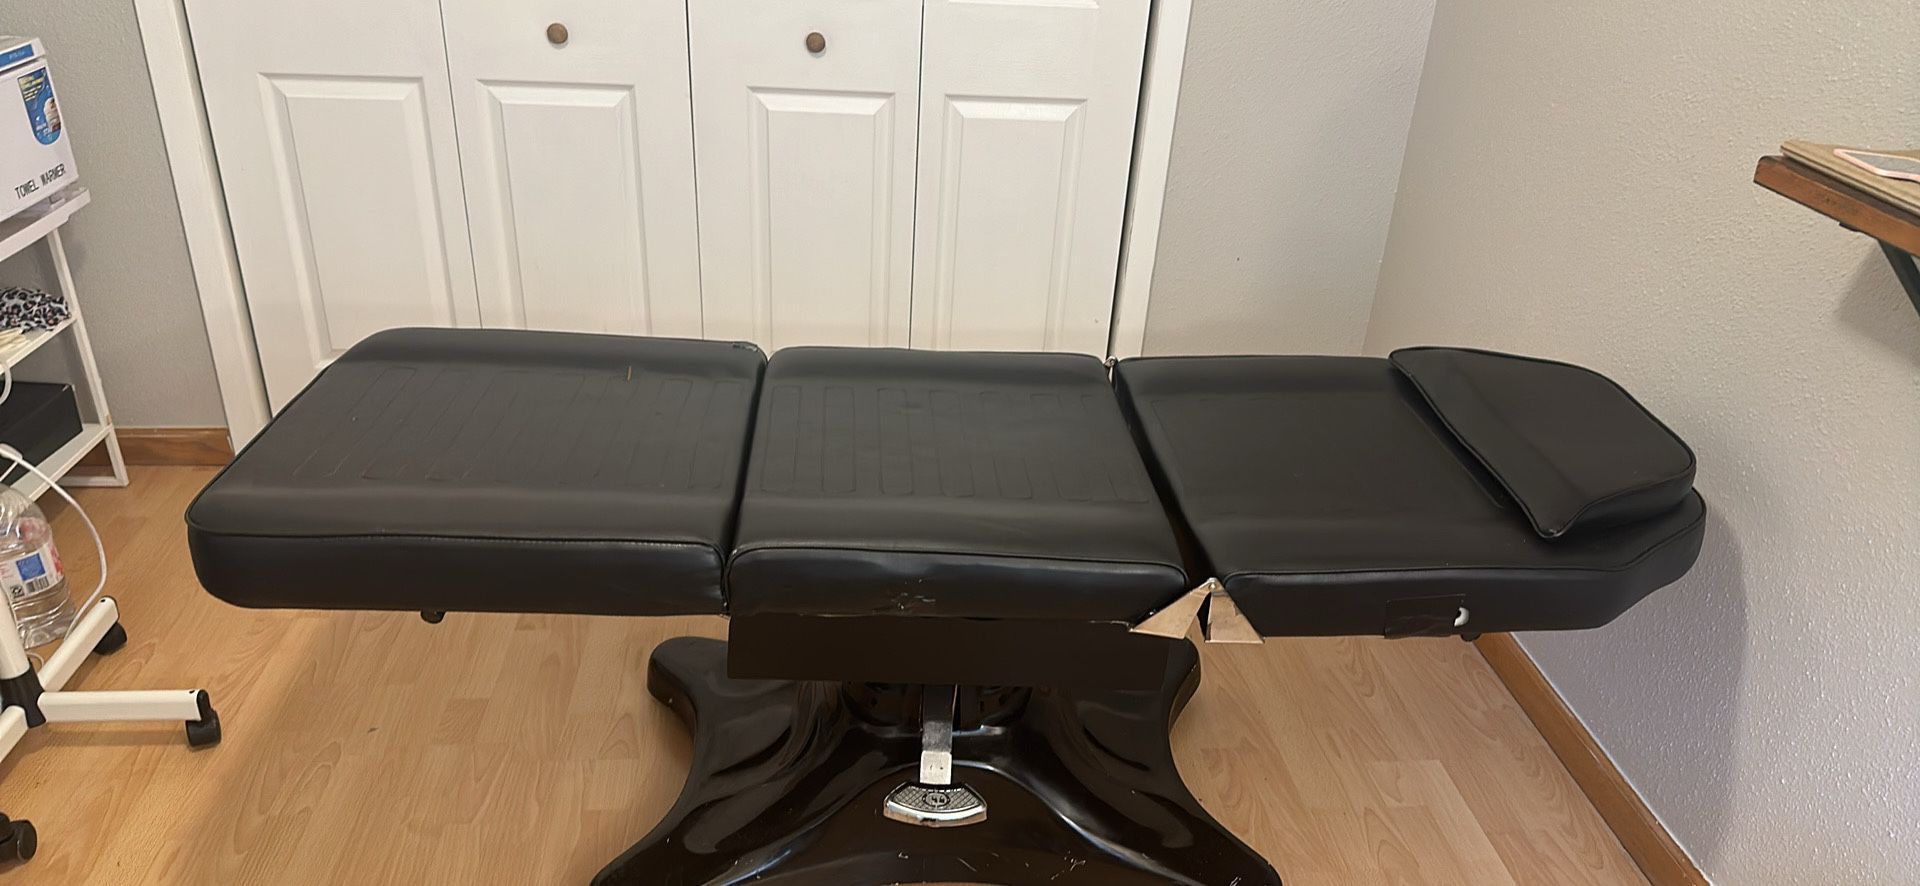 Tattoo Chair/ Bed For Facial Or Waxing